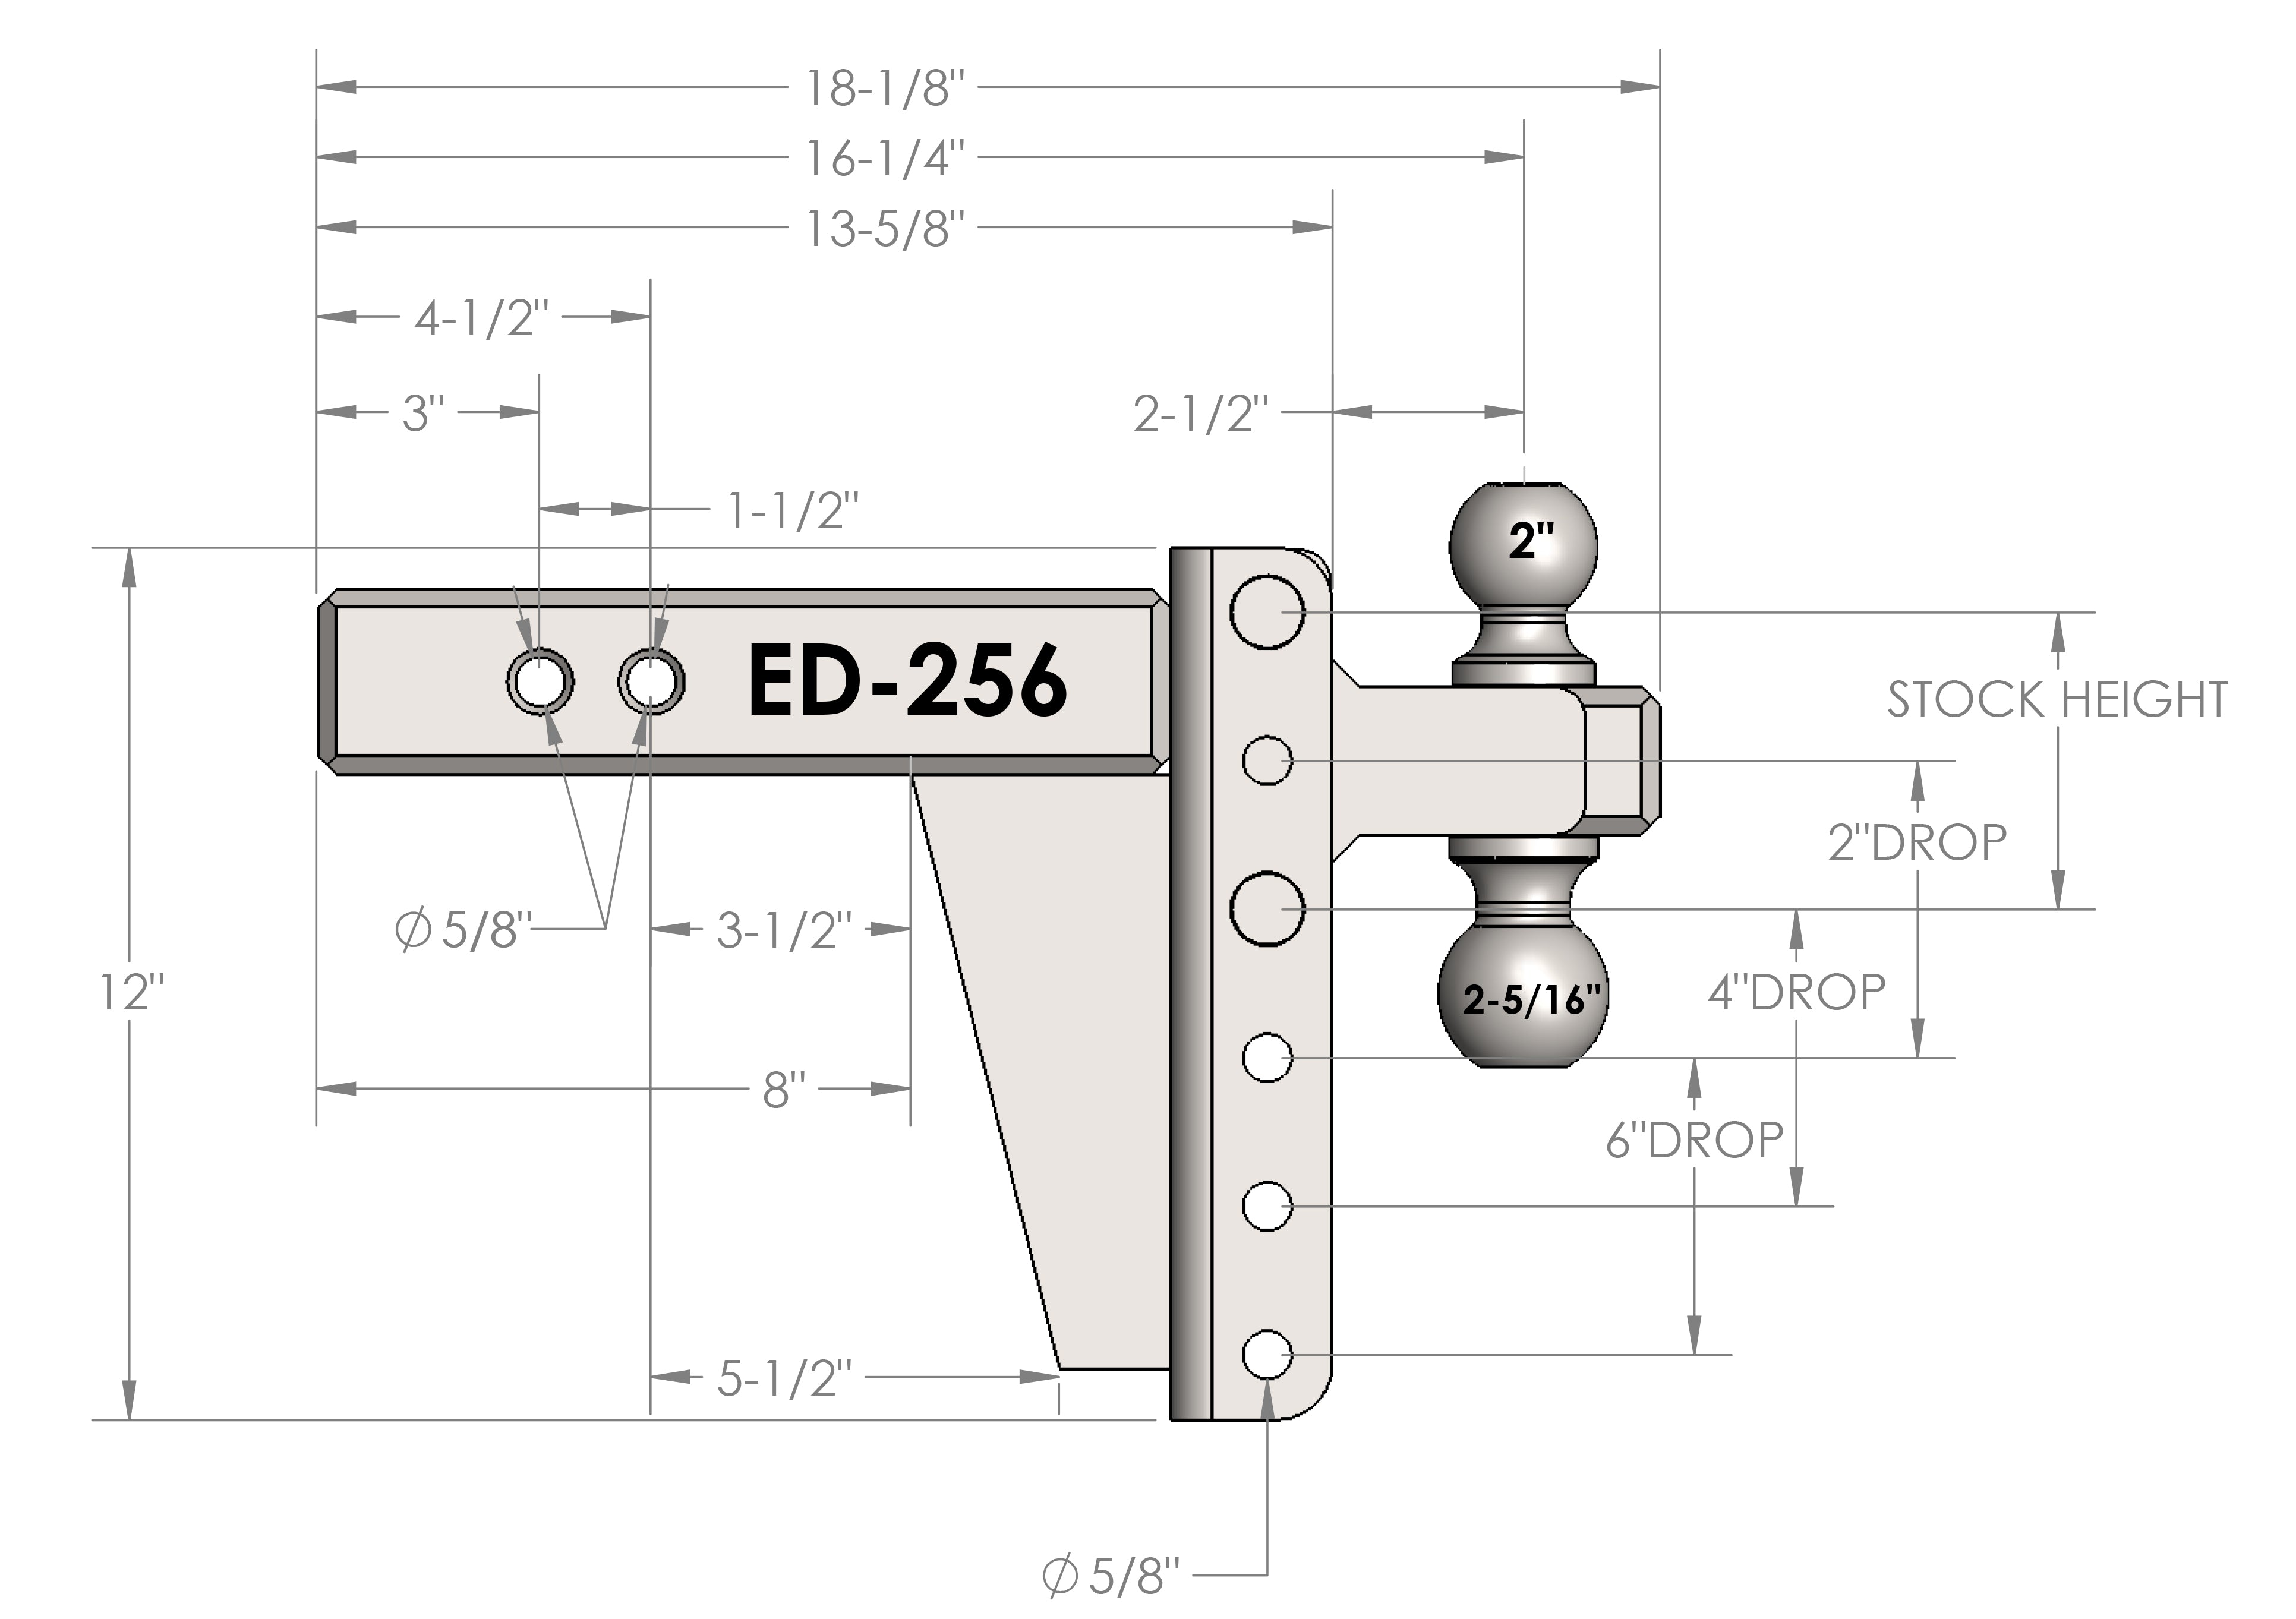 2.5" Extreme Duty 6" Drop/Rise Hitch Design Specification